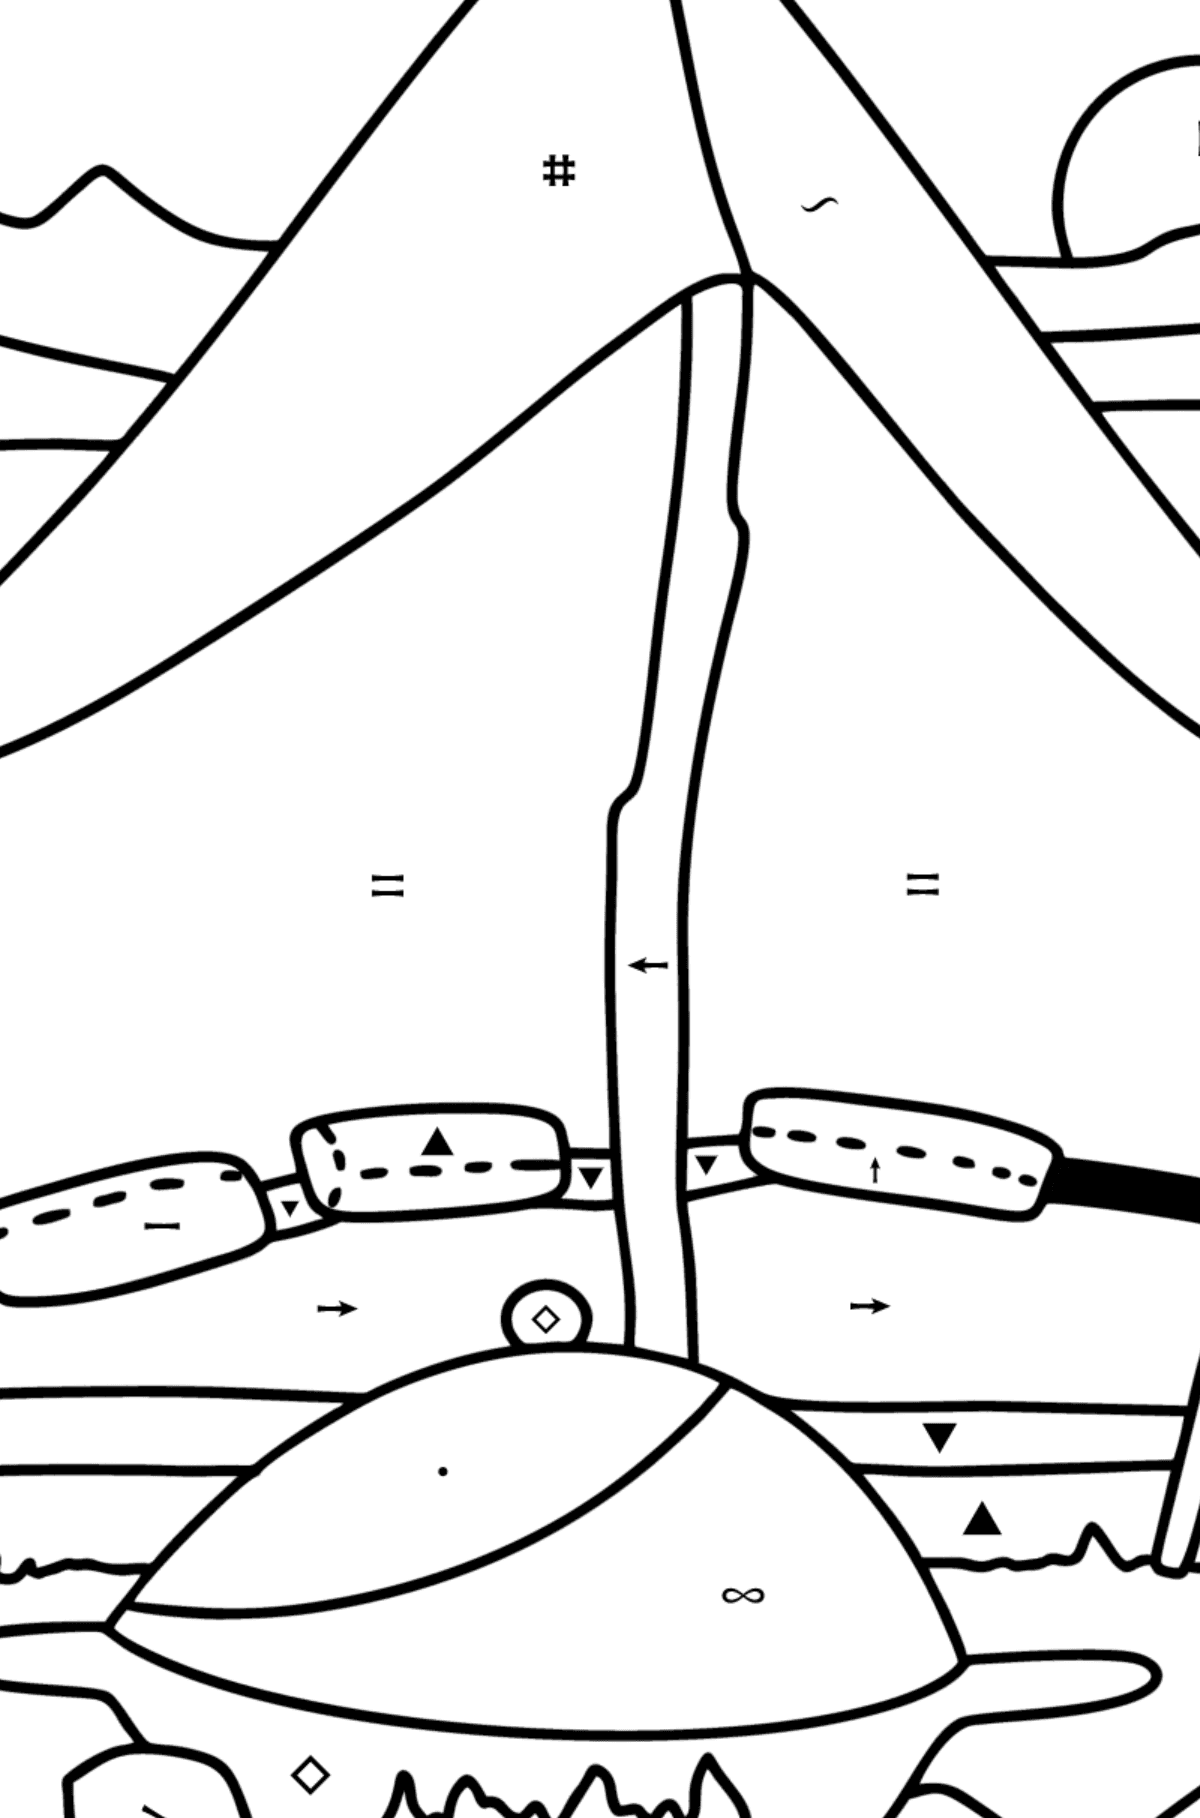 Bedouin tent coloring page - Coloring by Symbols for Kids